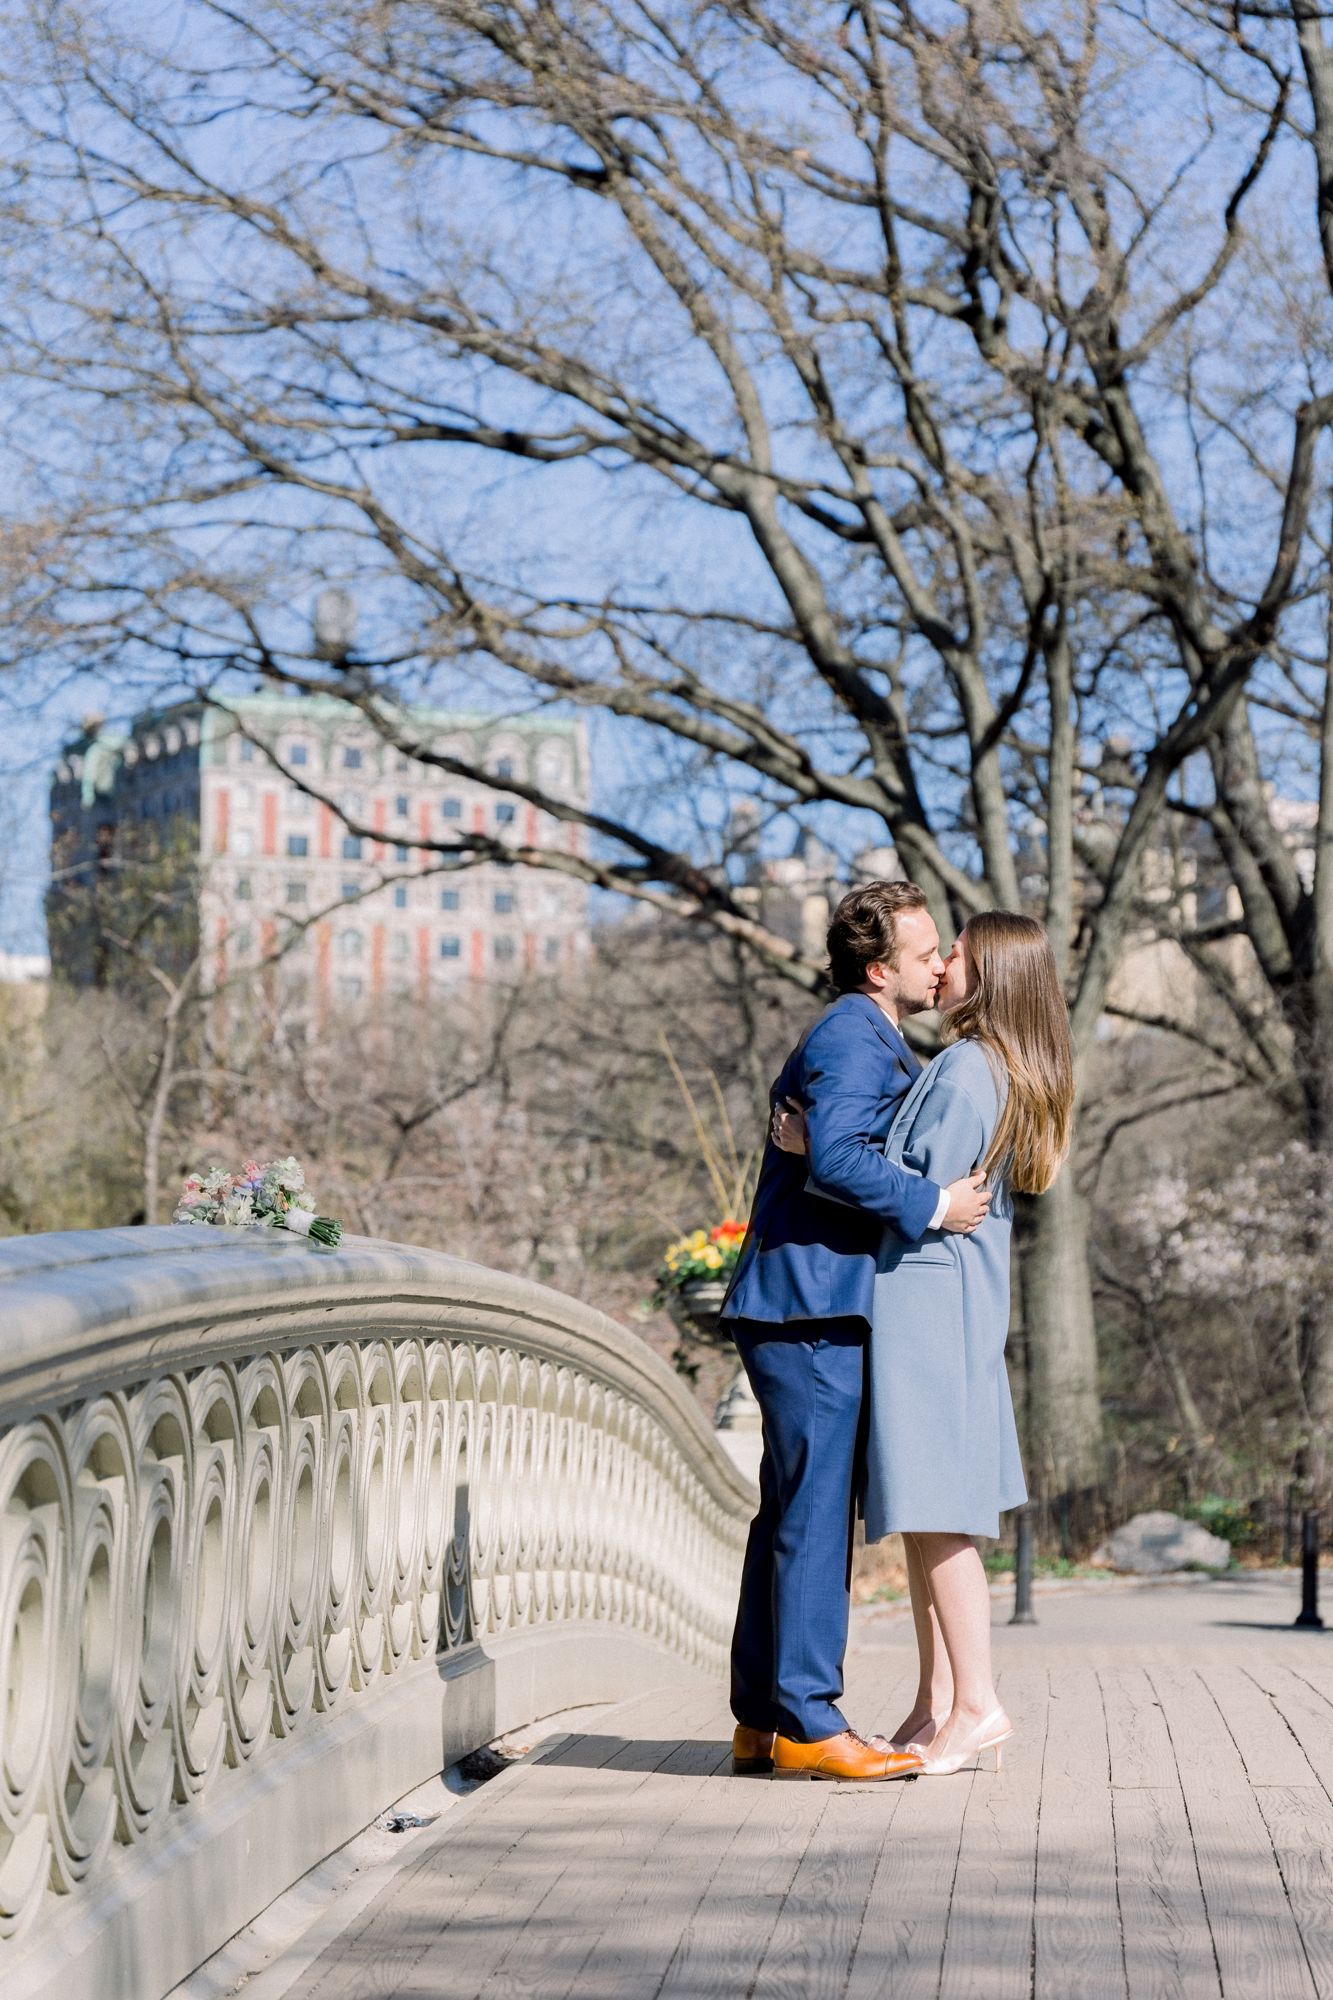 Special Spring Bow Bridge Wedding in Central Park Among the Cherry Blossoms